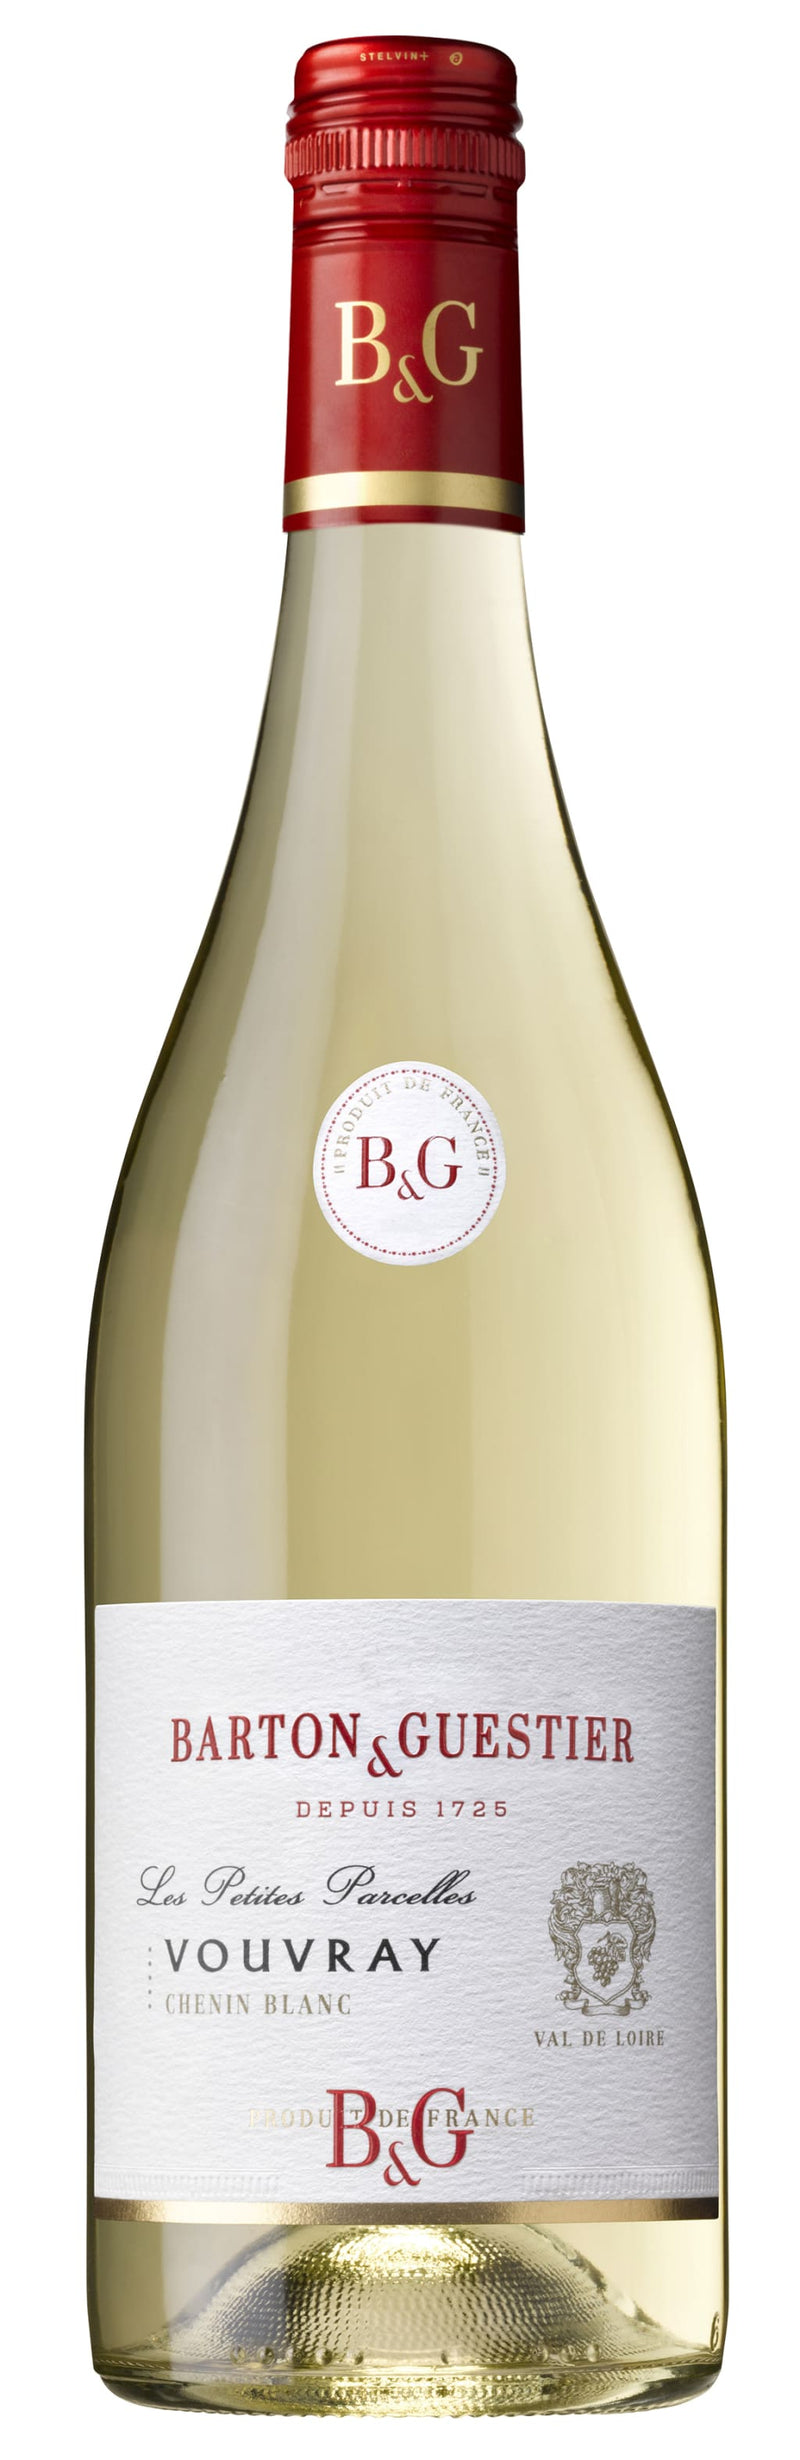 B & G Vouvray, Loire Valley